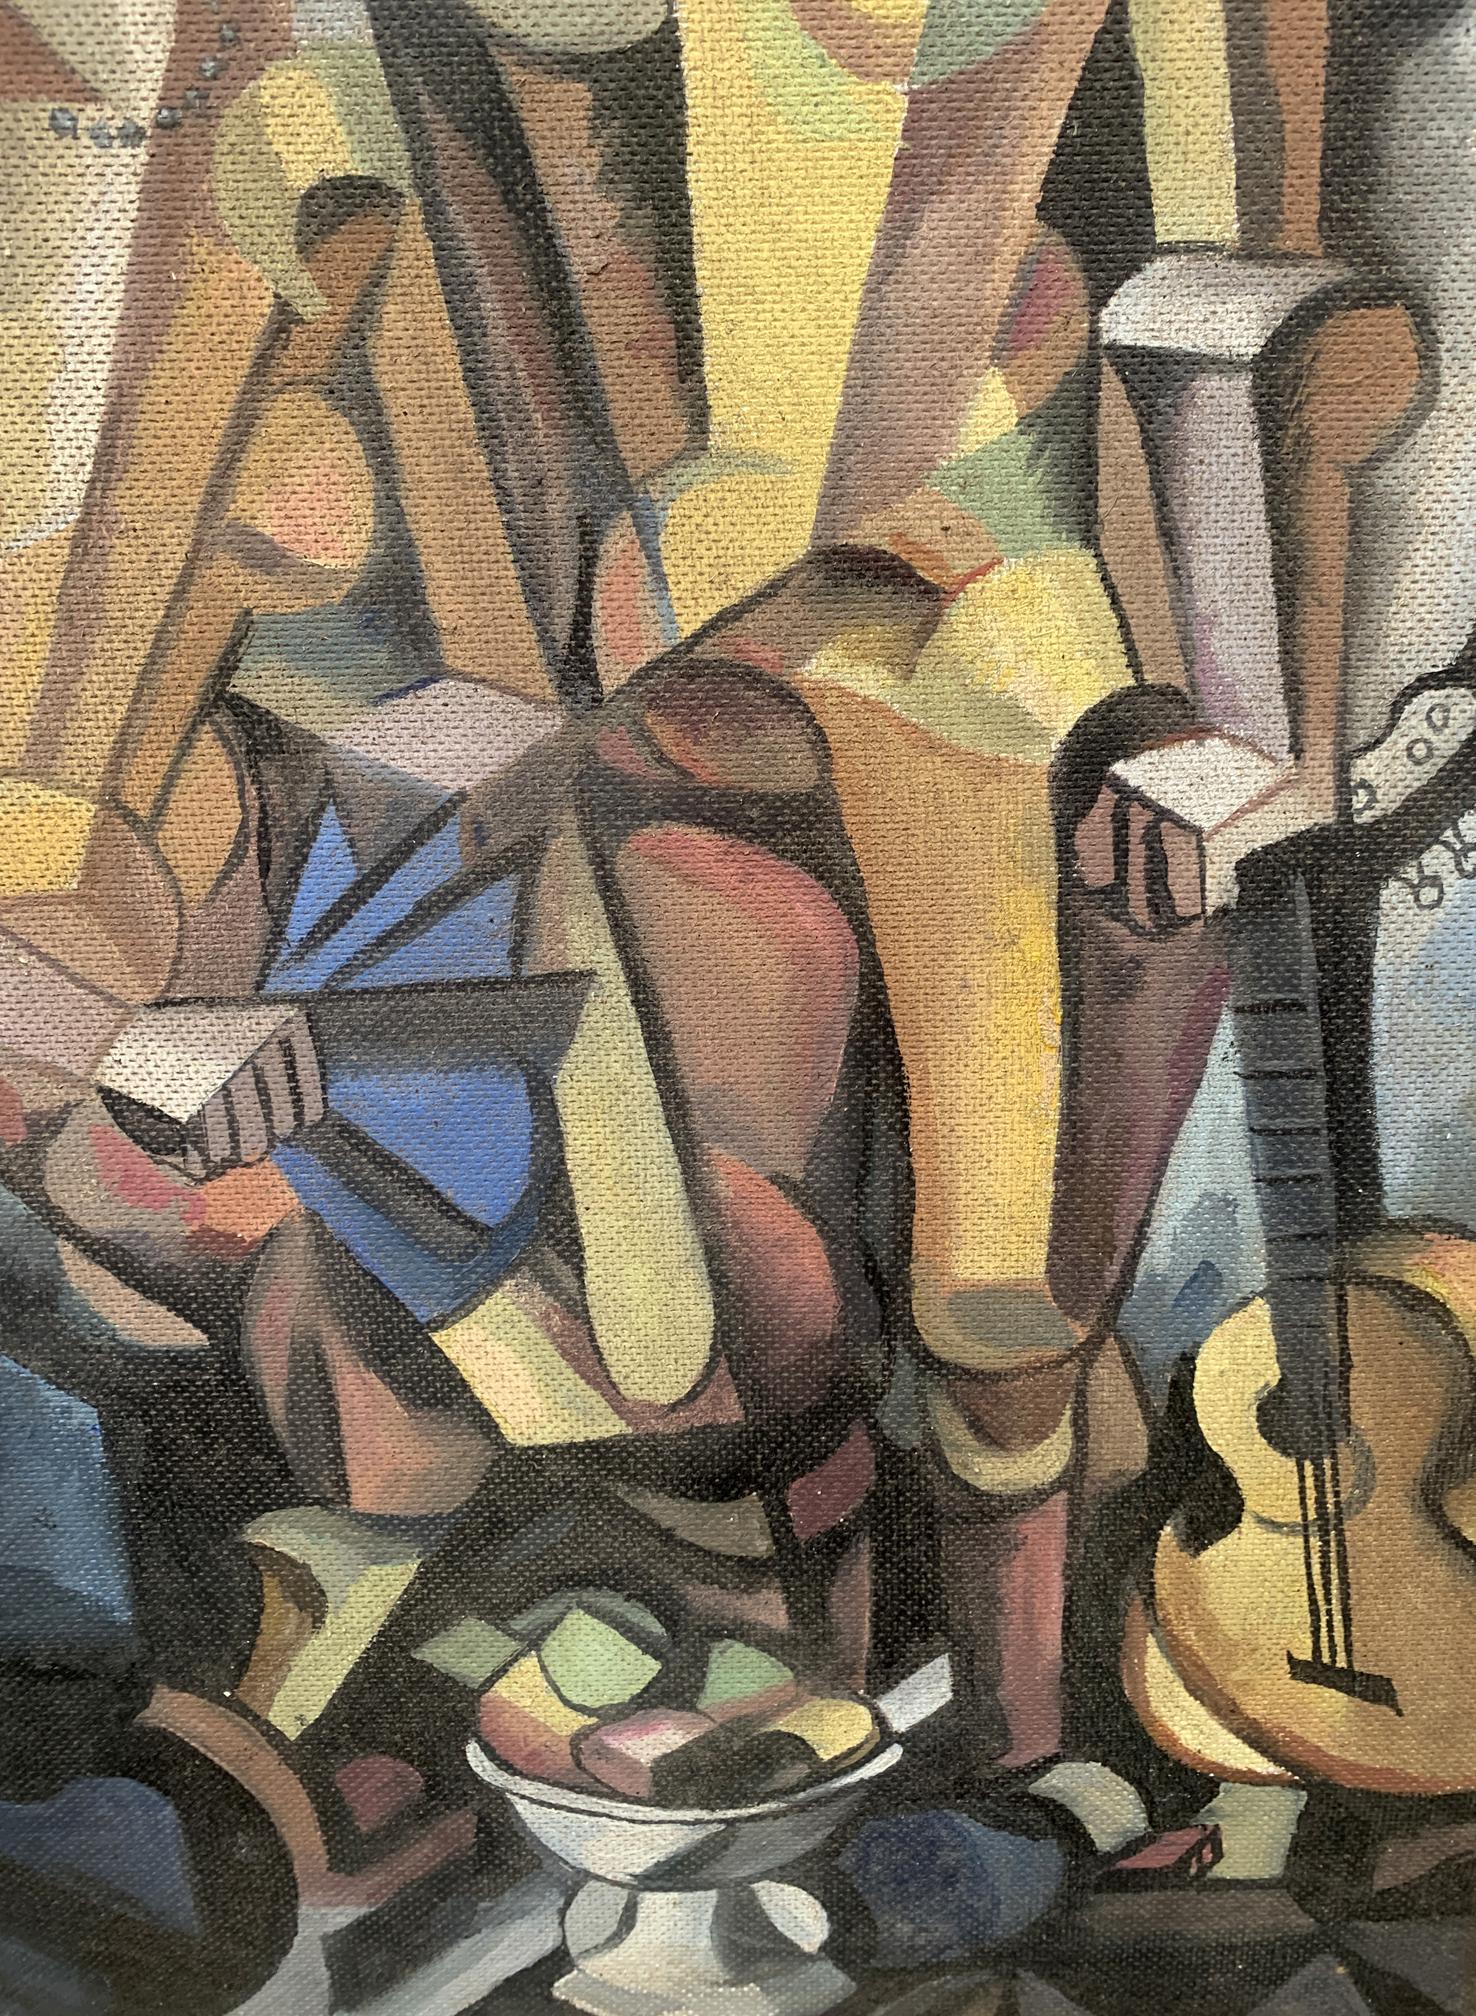 "Symphony of Colors" by V. Konotopsky: Abstract Musicians in Oil